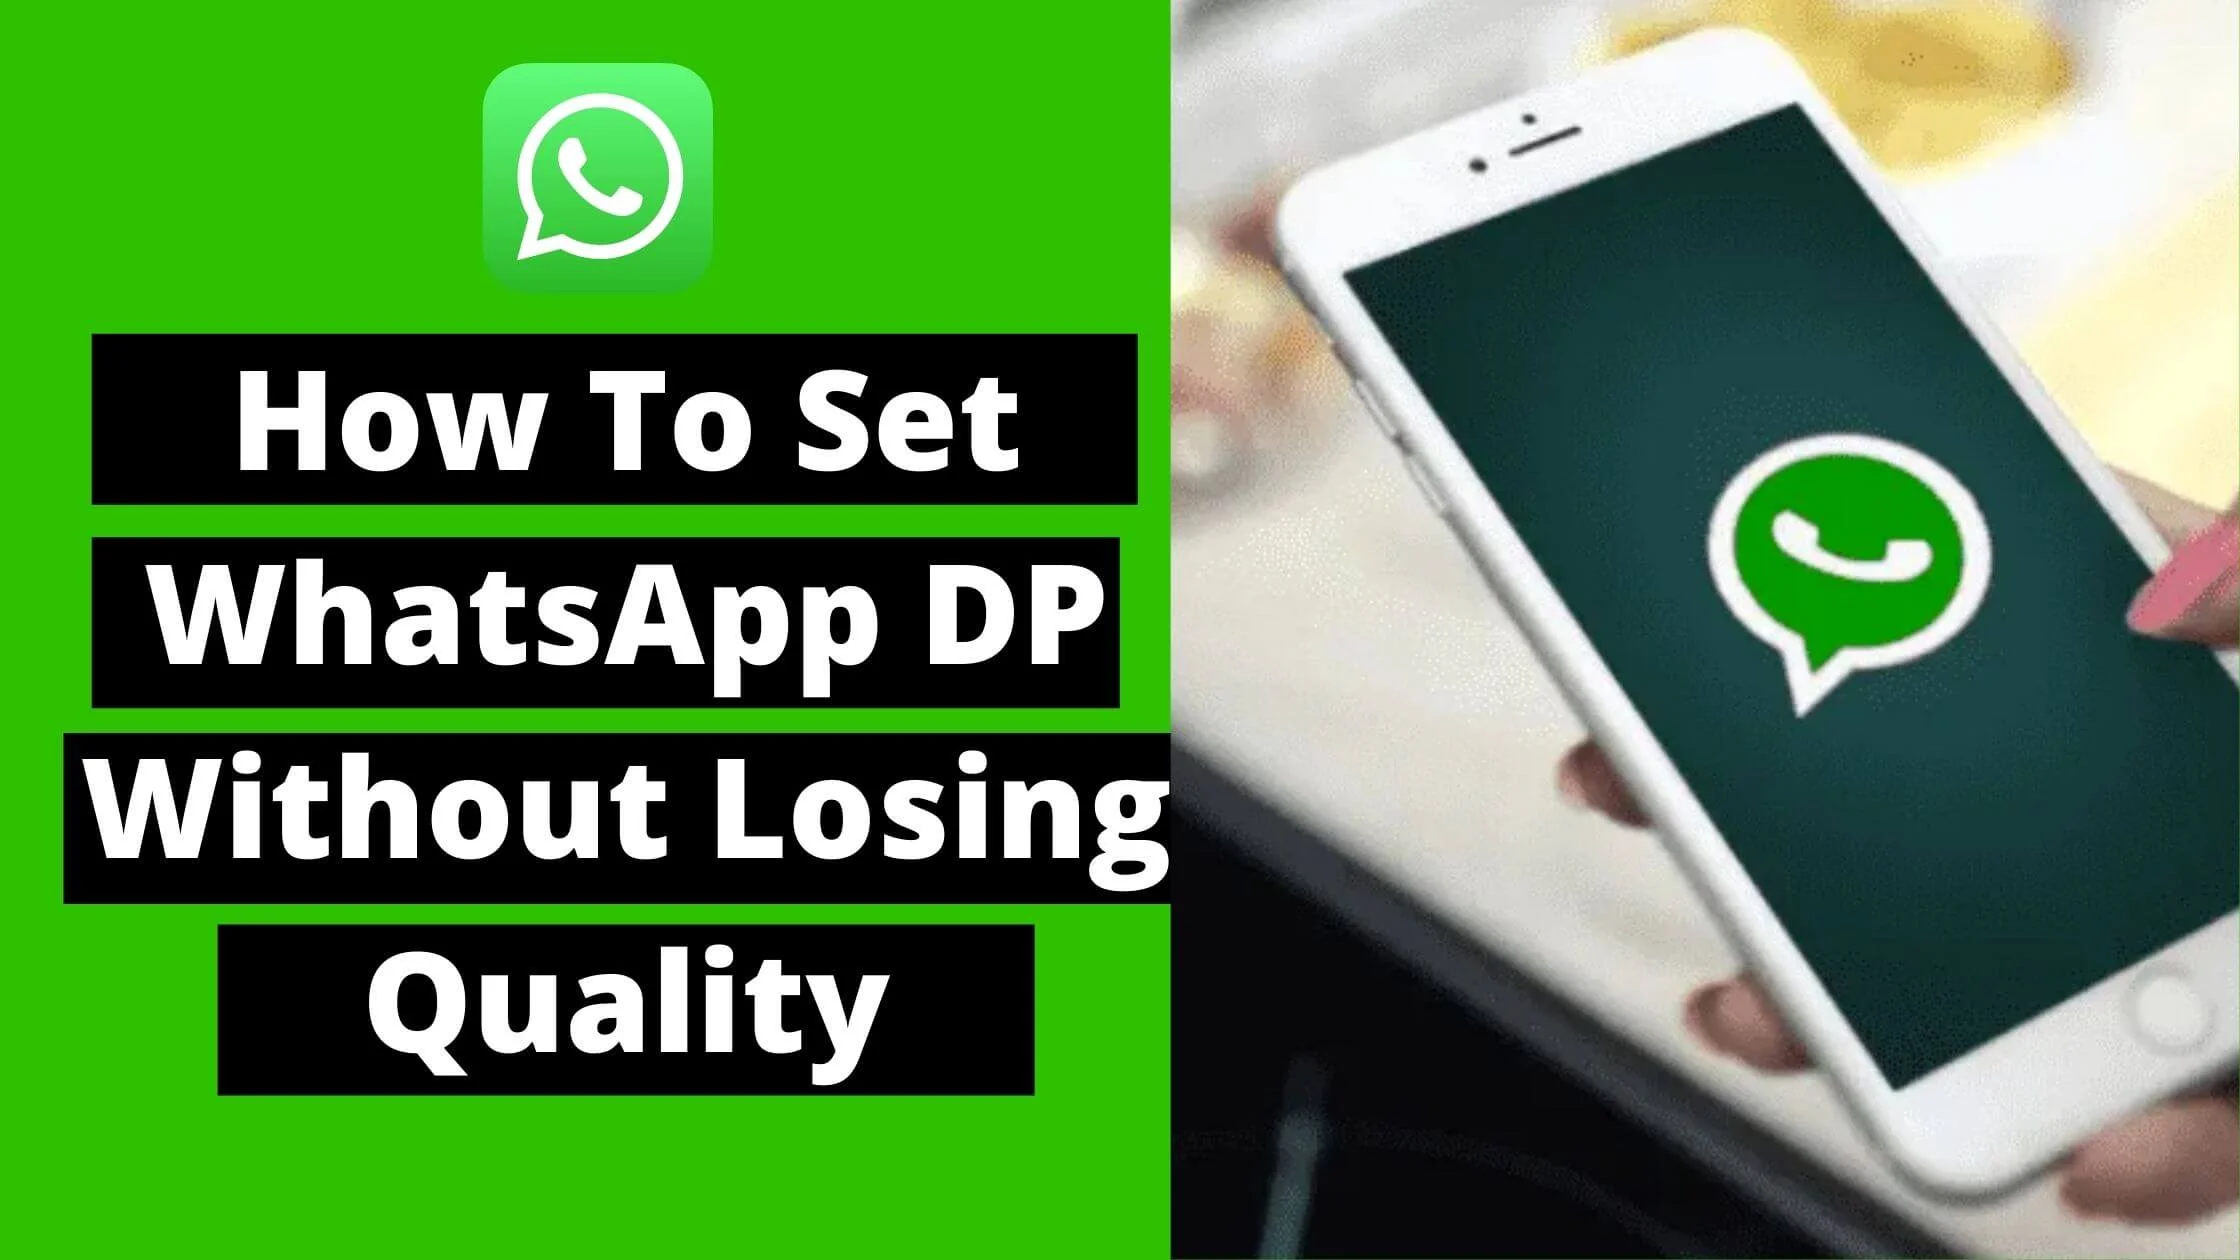 How To Set WhatsApp DP Without Losing Quality